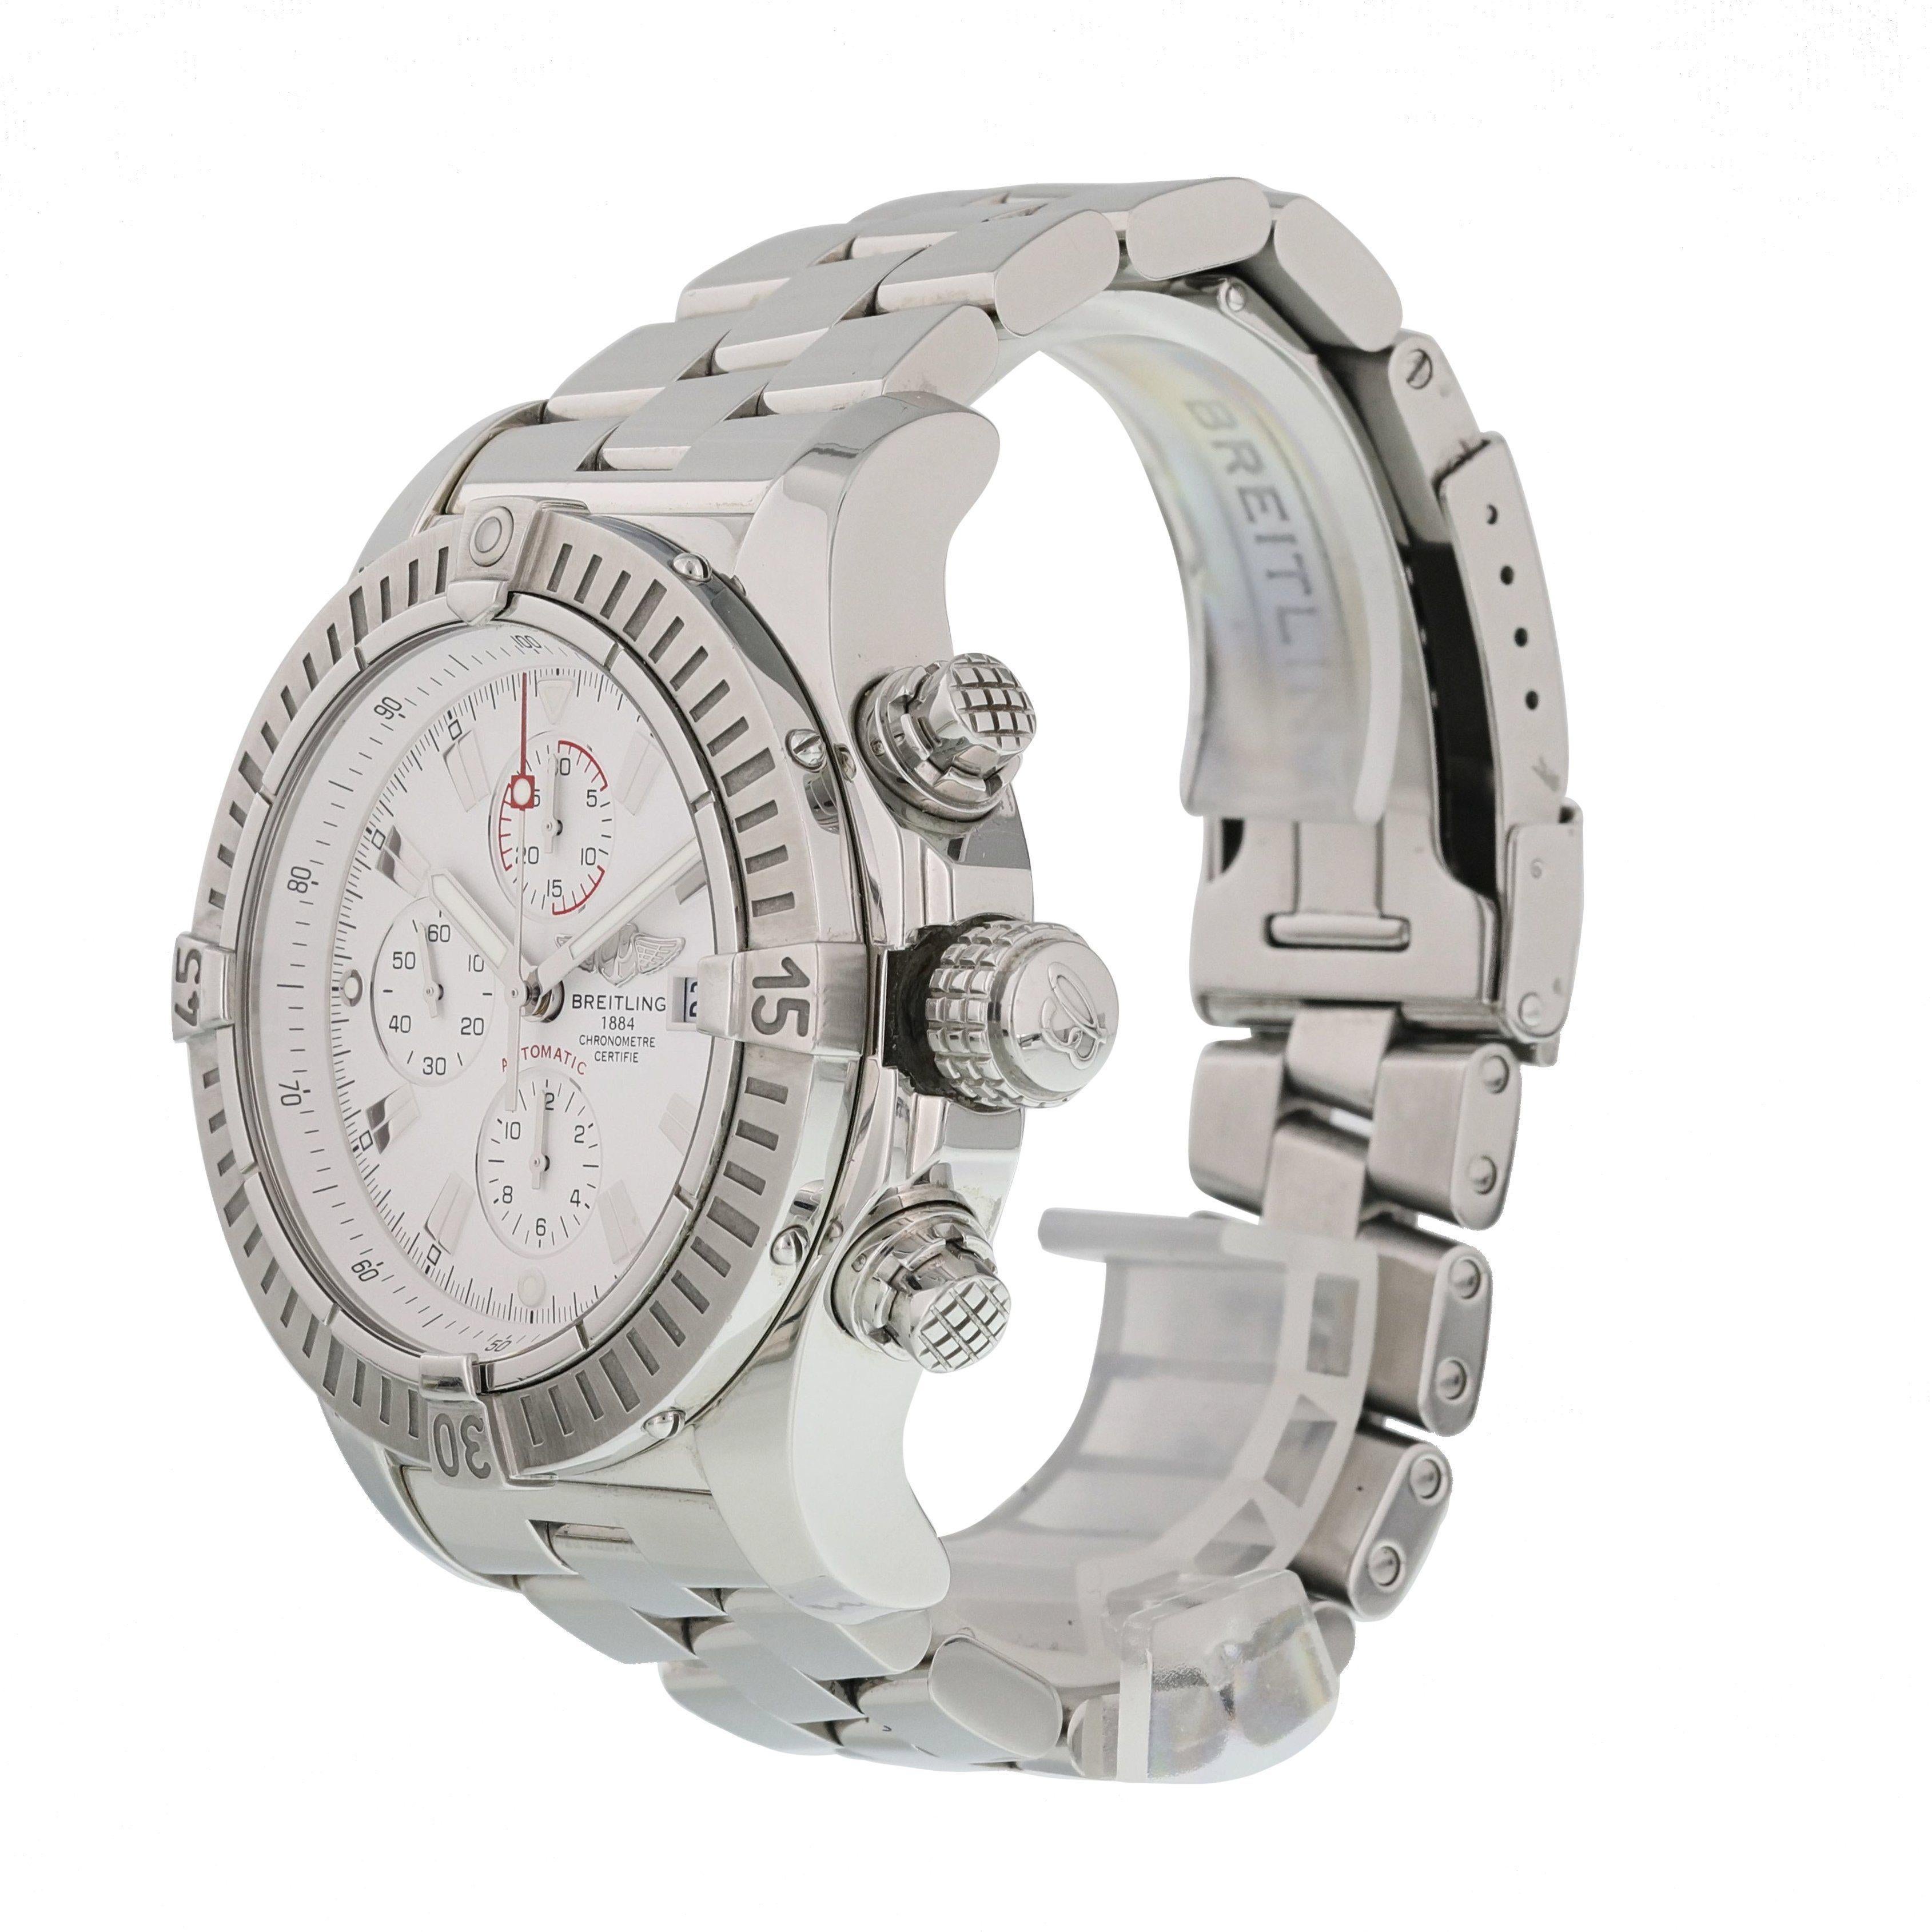 Breitling Super Avenger A13370 Men's Watch In Excellent Condition For Sale In New York, NY